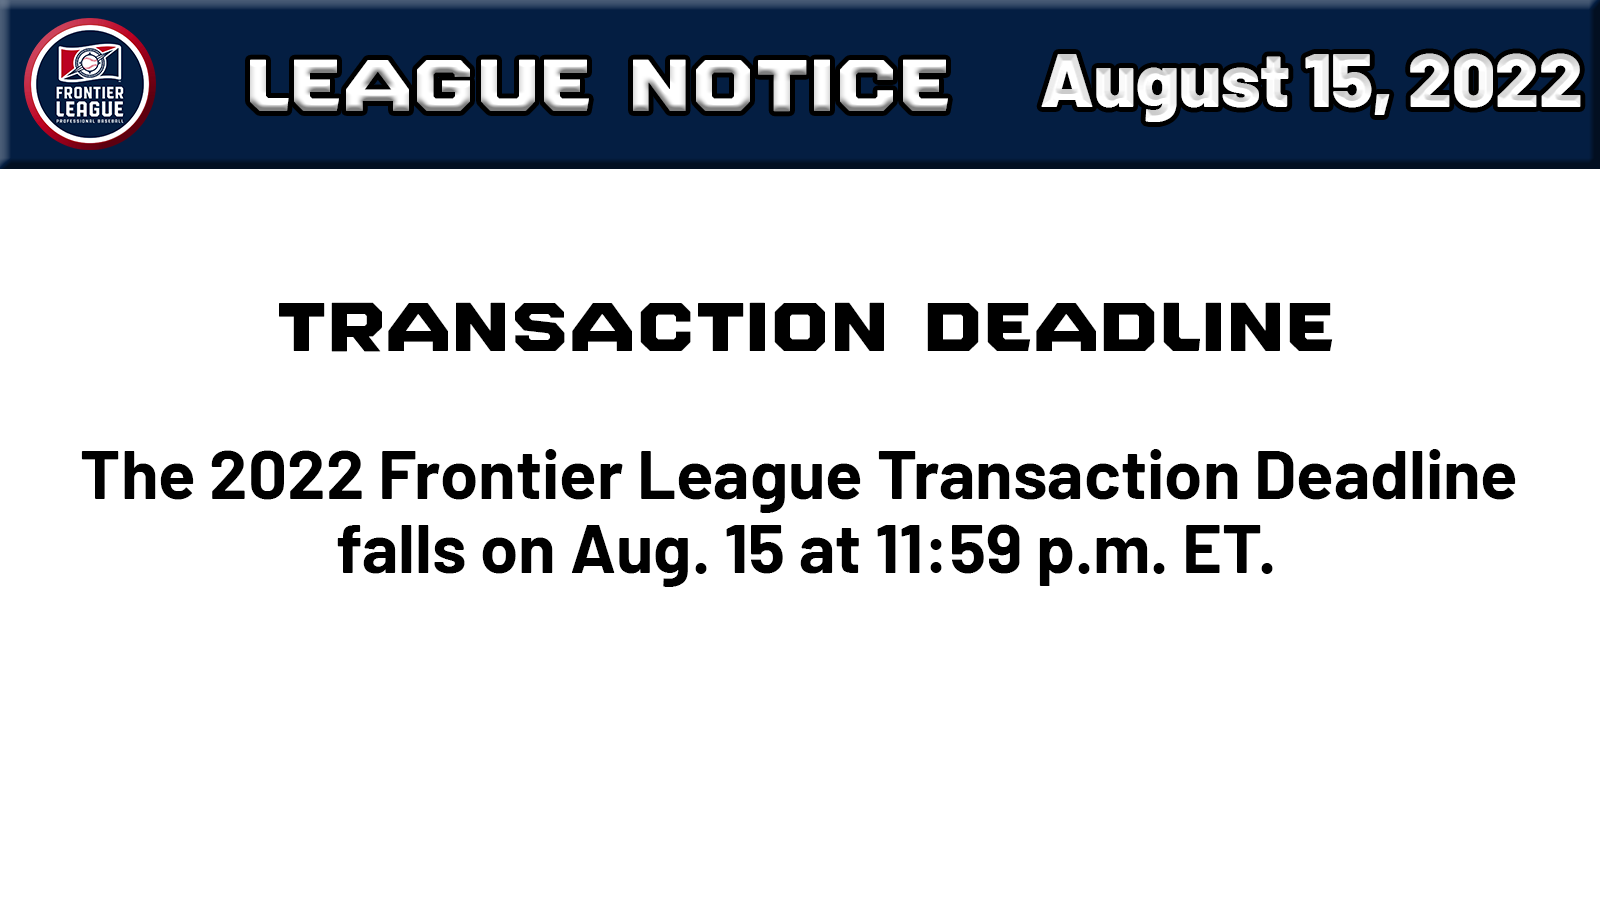 TRANSACTION DEADLINE CLOSES AS PLAYOFF RACES ARE APPROACHING